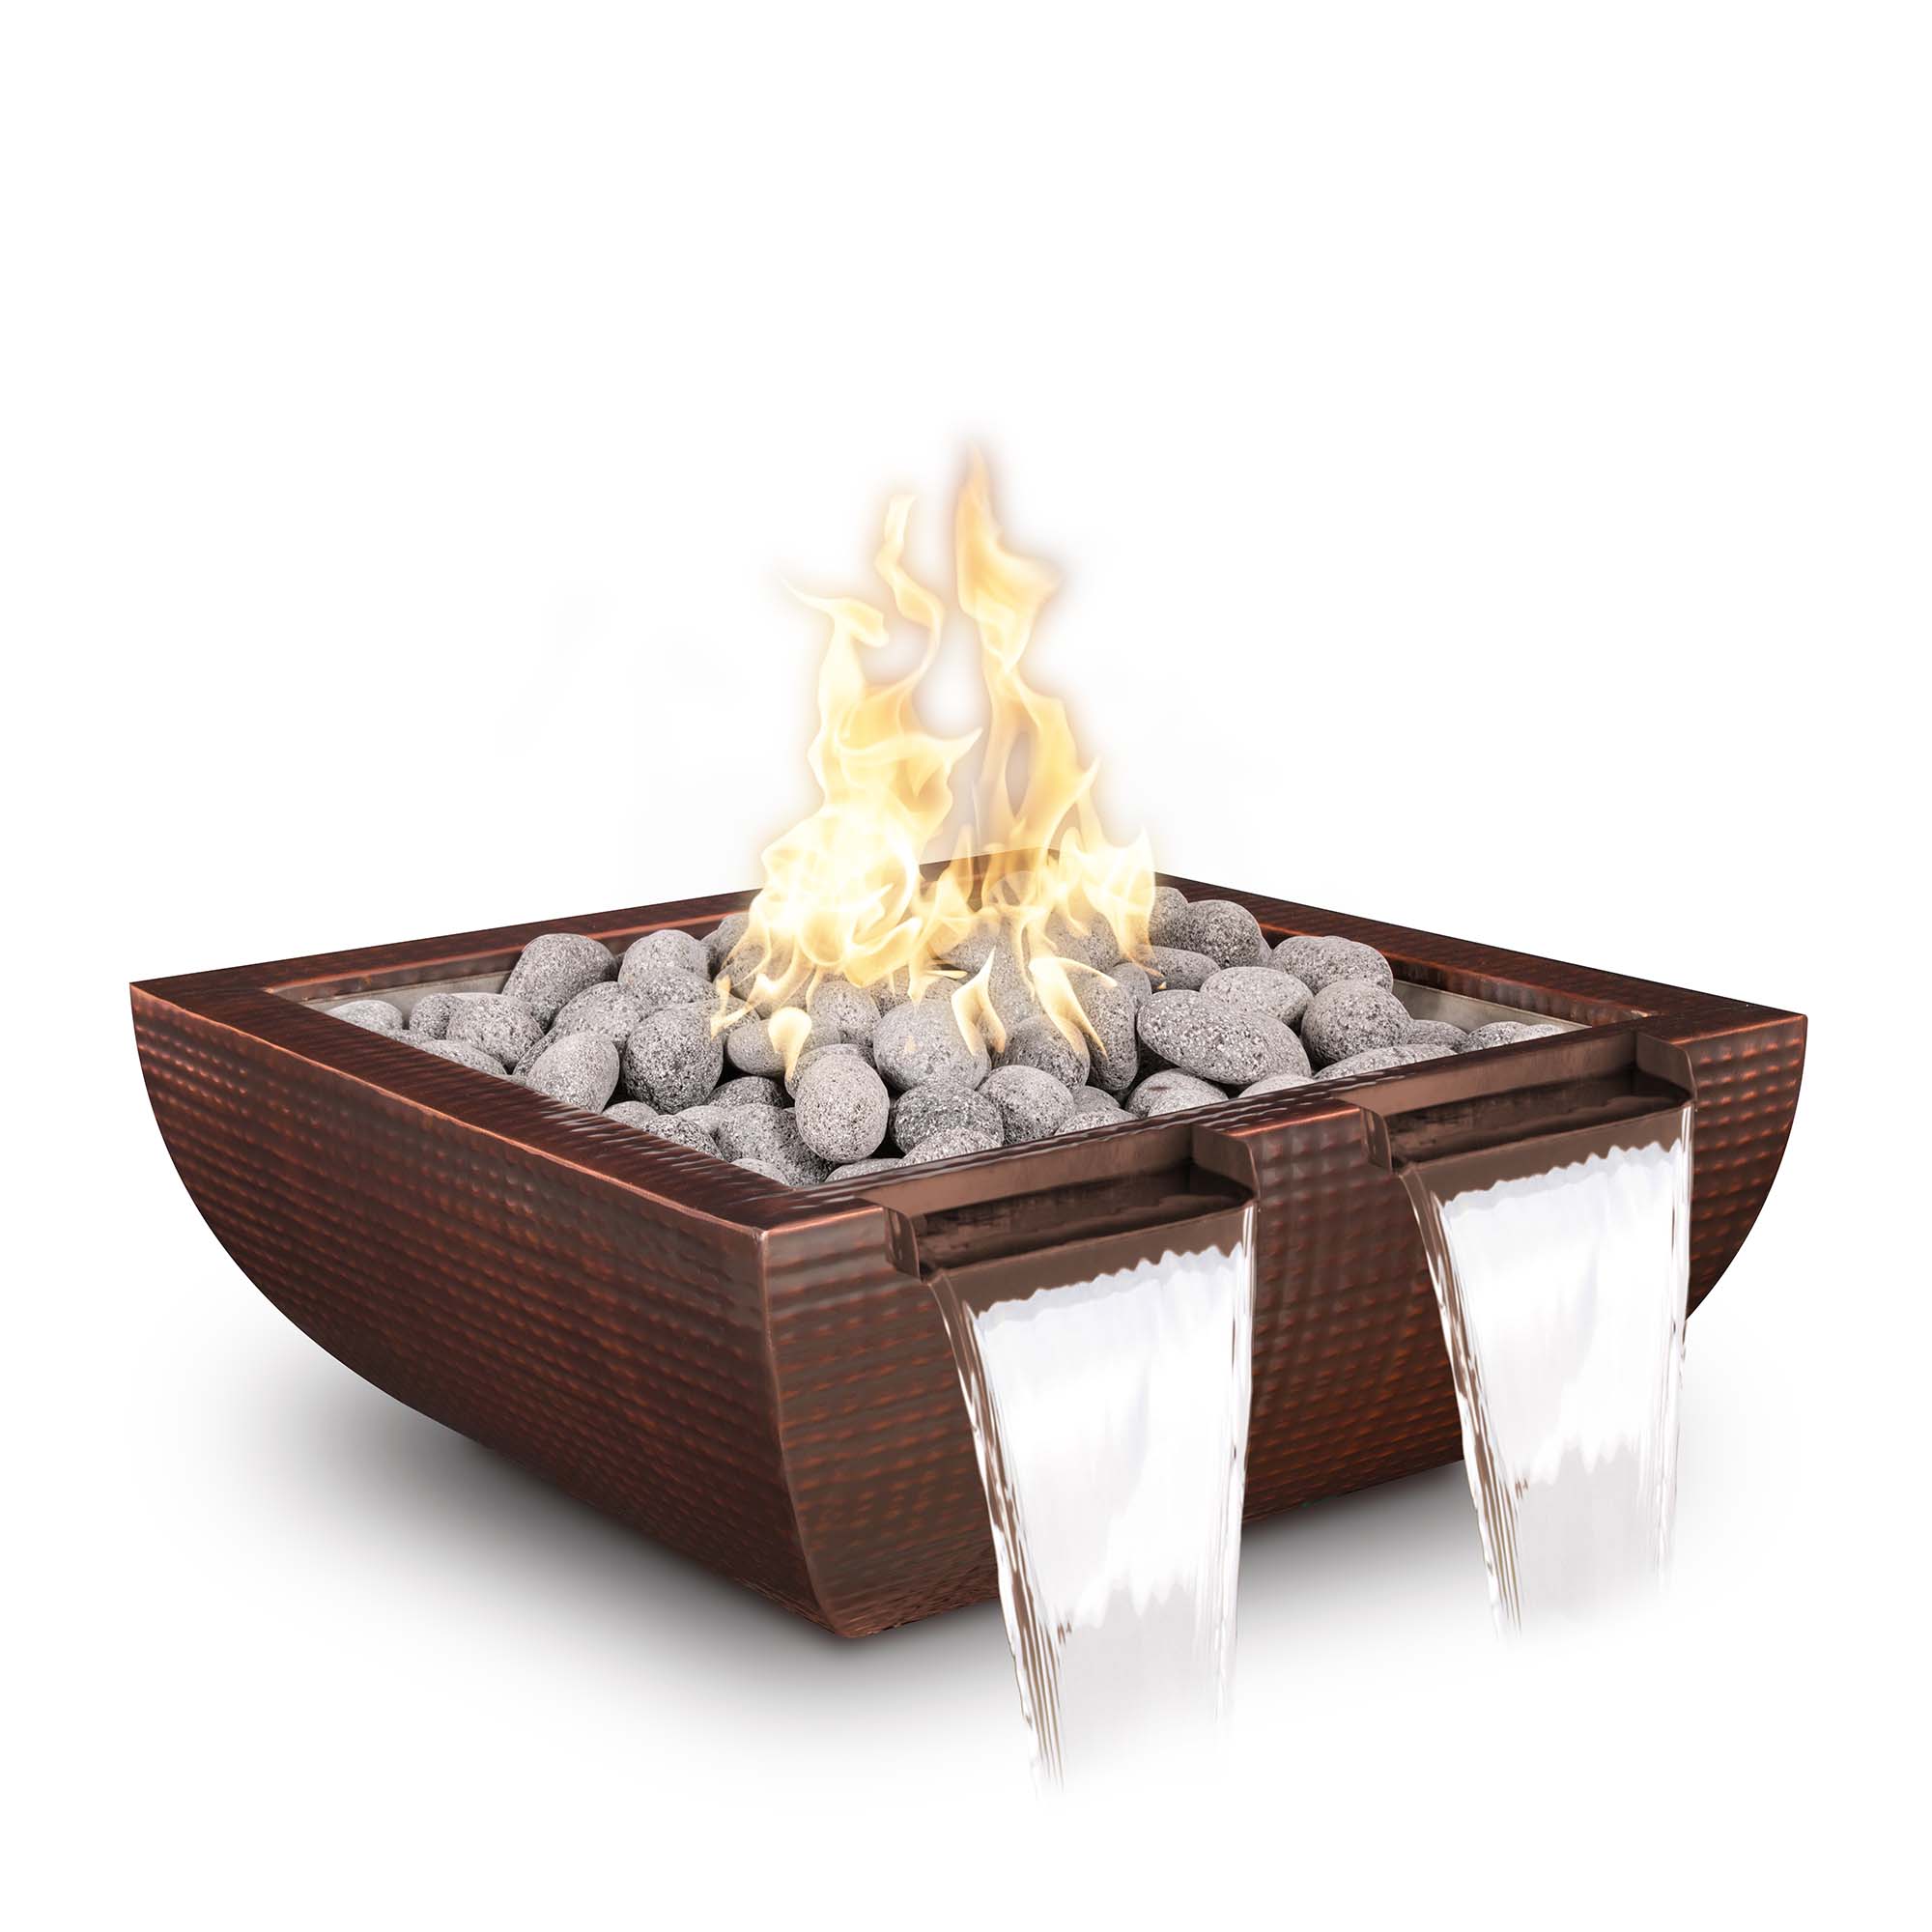 Avalon Hammered Copper Fire and Water Bowl - Twin Spillway